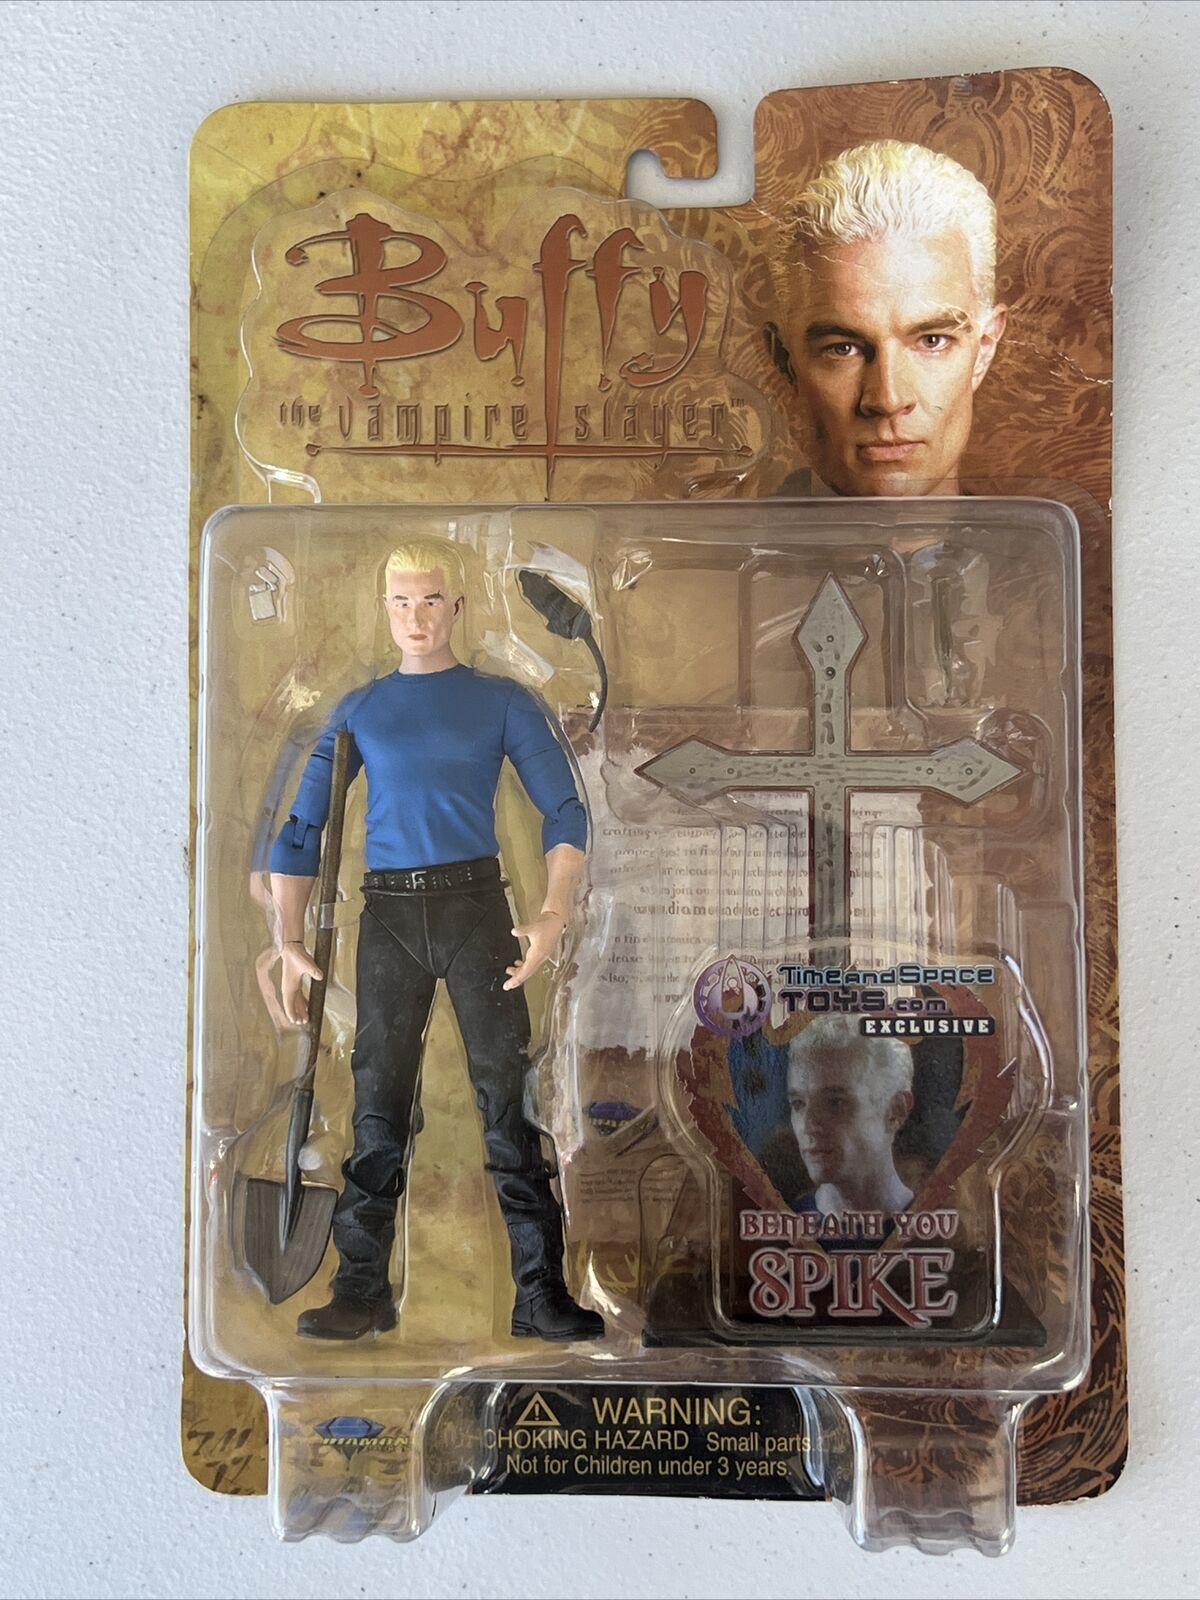 Buffy the Vampire Slayer Beneath You Spike Time & Space Exclusive Diamond Select